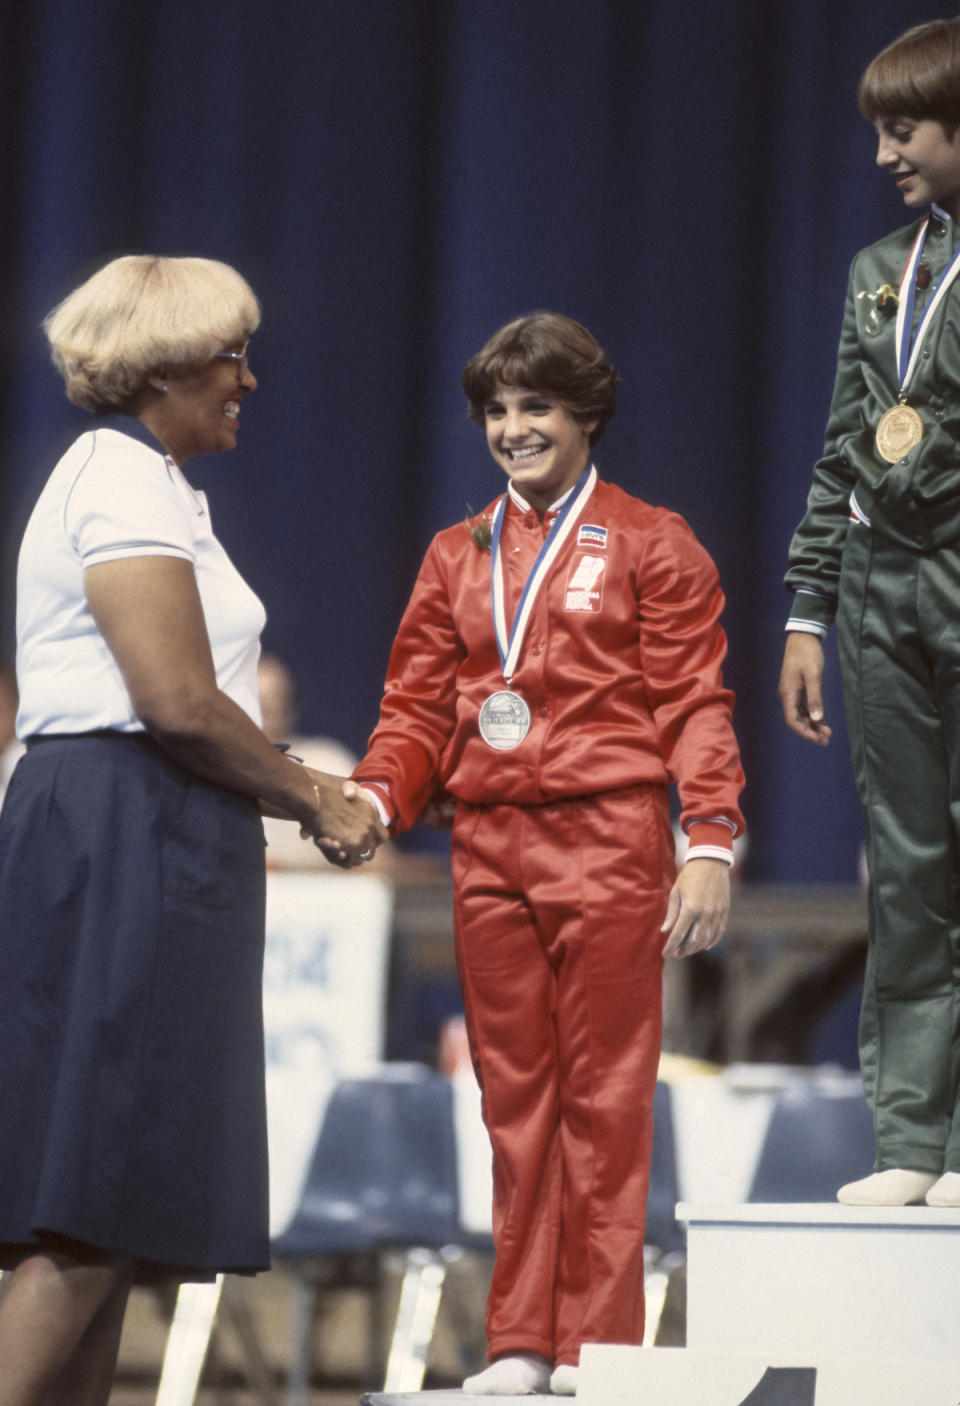 Mary Lou Retton at 1981 National Sports Festival 